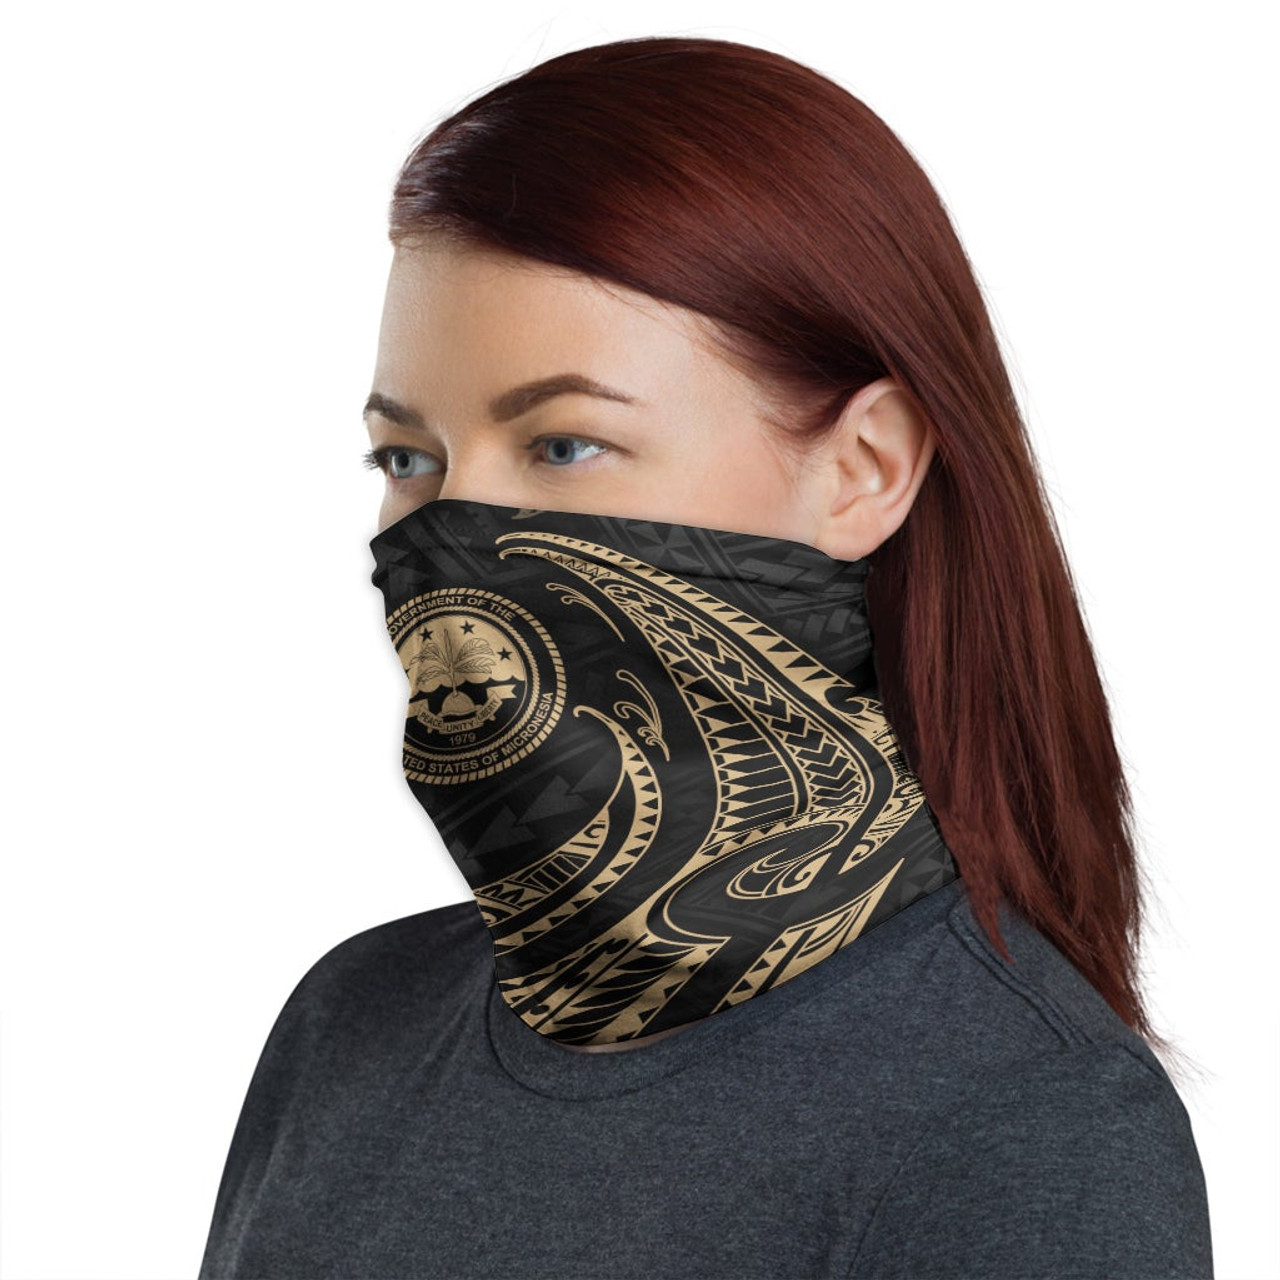 Federated States of Micronesia Neck Gaiter - Tribal Wave Gold 1